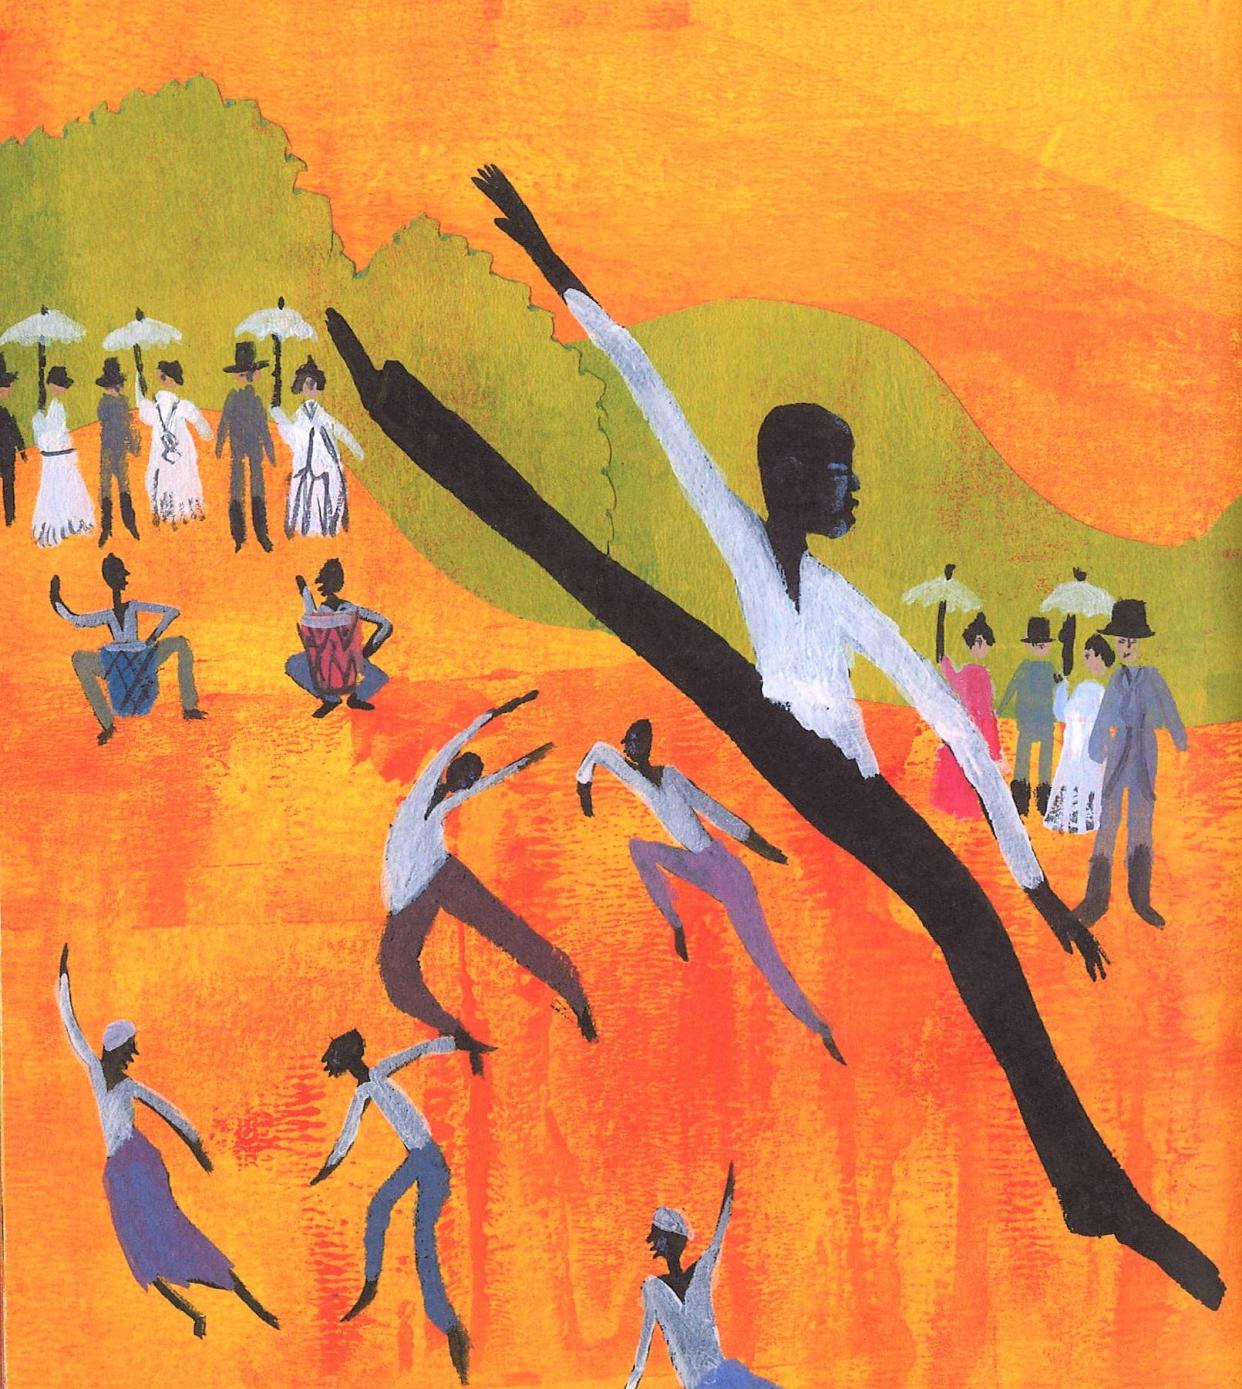 The celebration of Sunday, after a week of work, is the focus of "Freedom in Congo Square," a story by Carole Boston Weatherford and illustrated by Greg Christie.